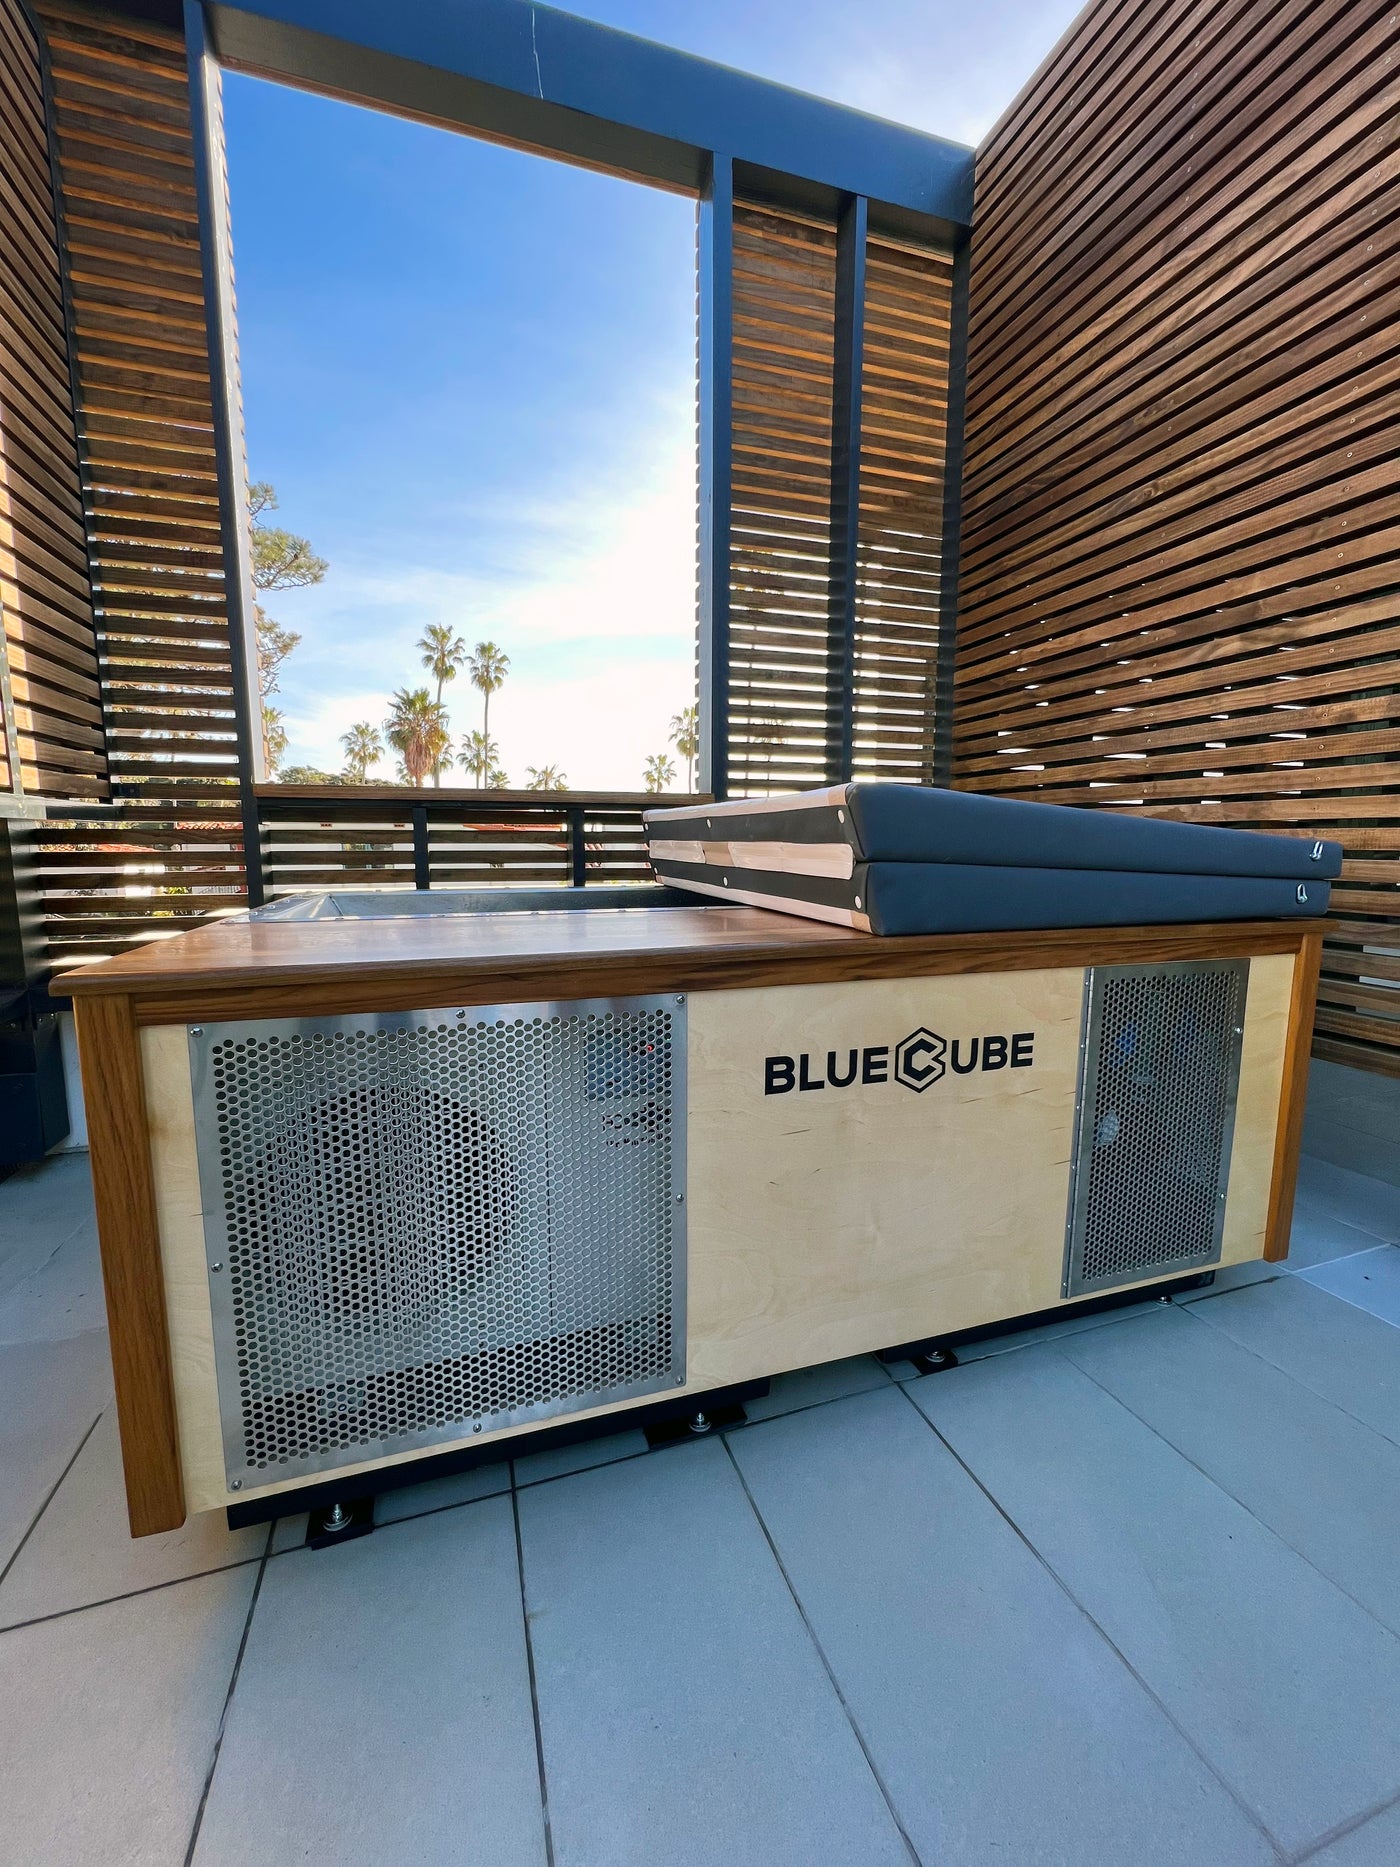 BlueCube Cold Plunge Tub: Malibu 66" custom teak deck and trim with insulative spa cover at a beachfront residence in San Diego, CA.   